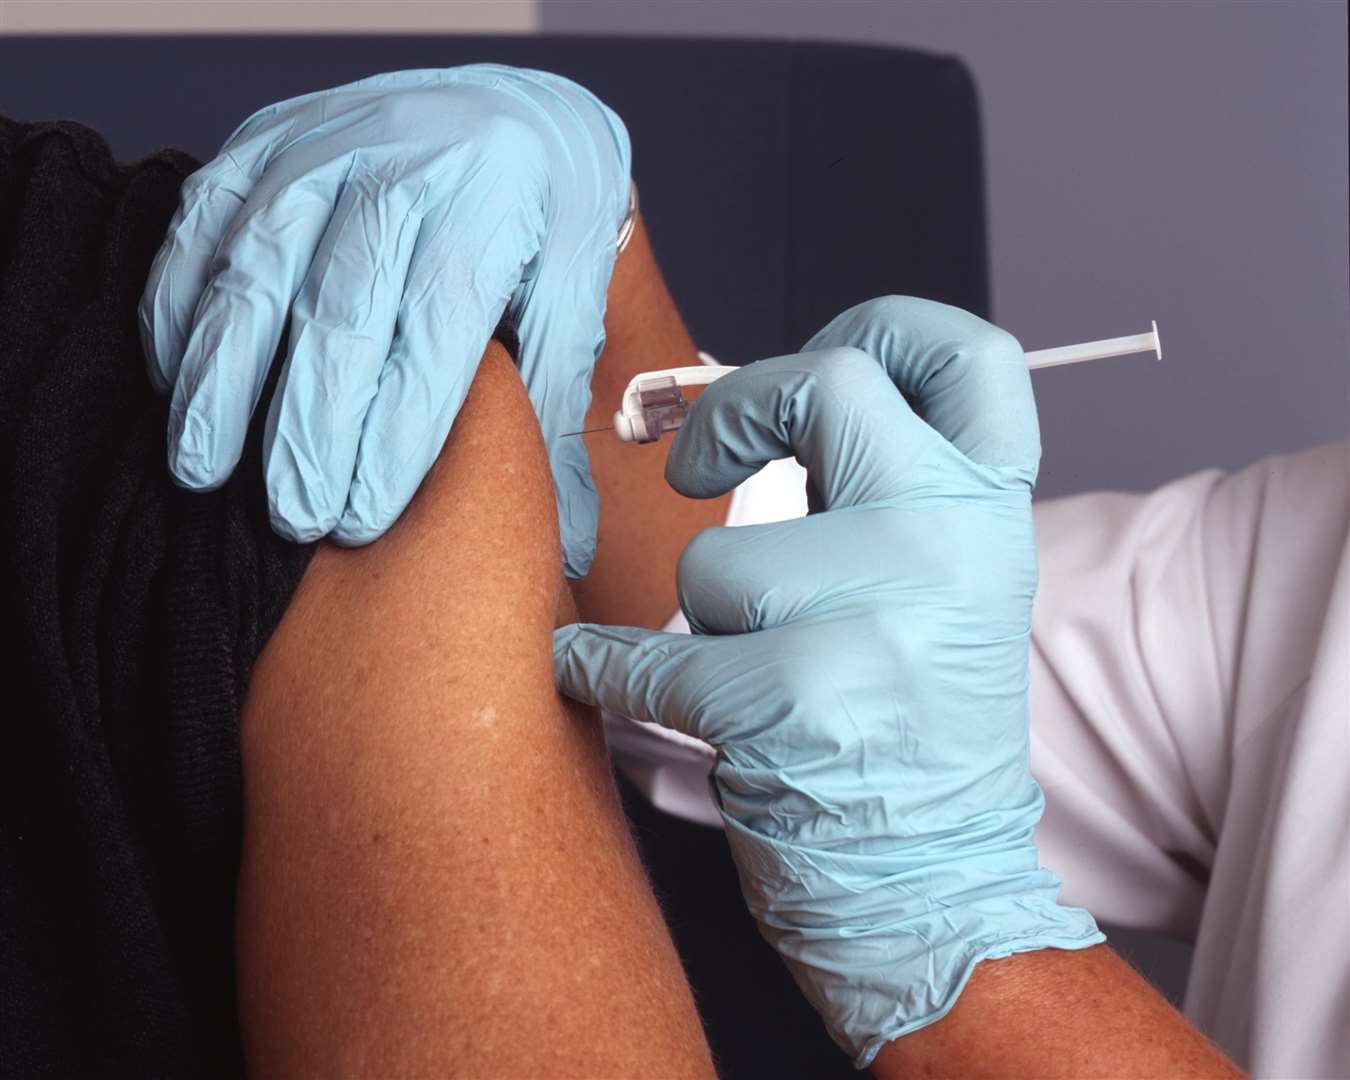 Everyone aged over 70 is now being urged to contact the NHS for their vaccine